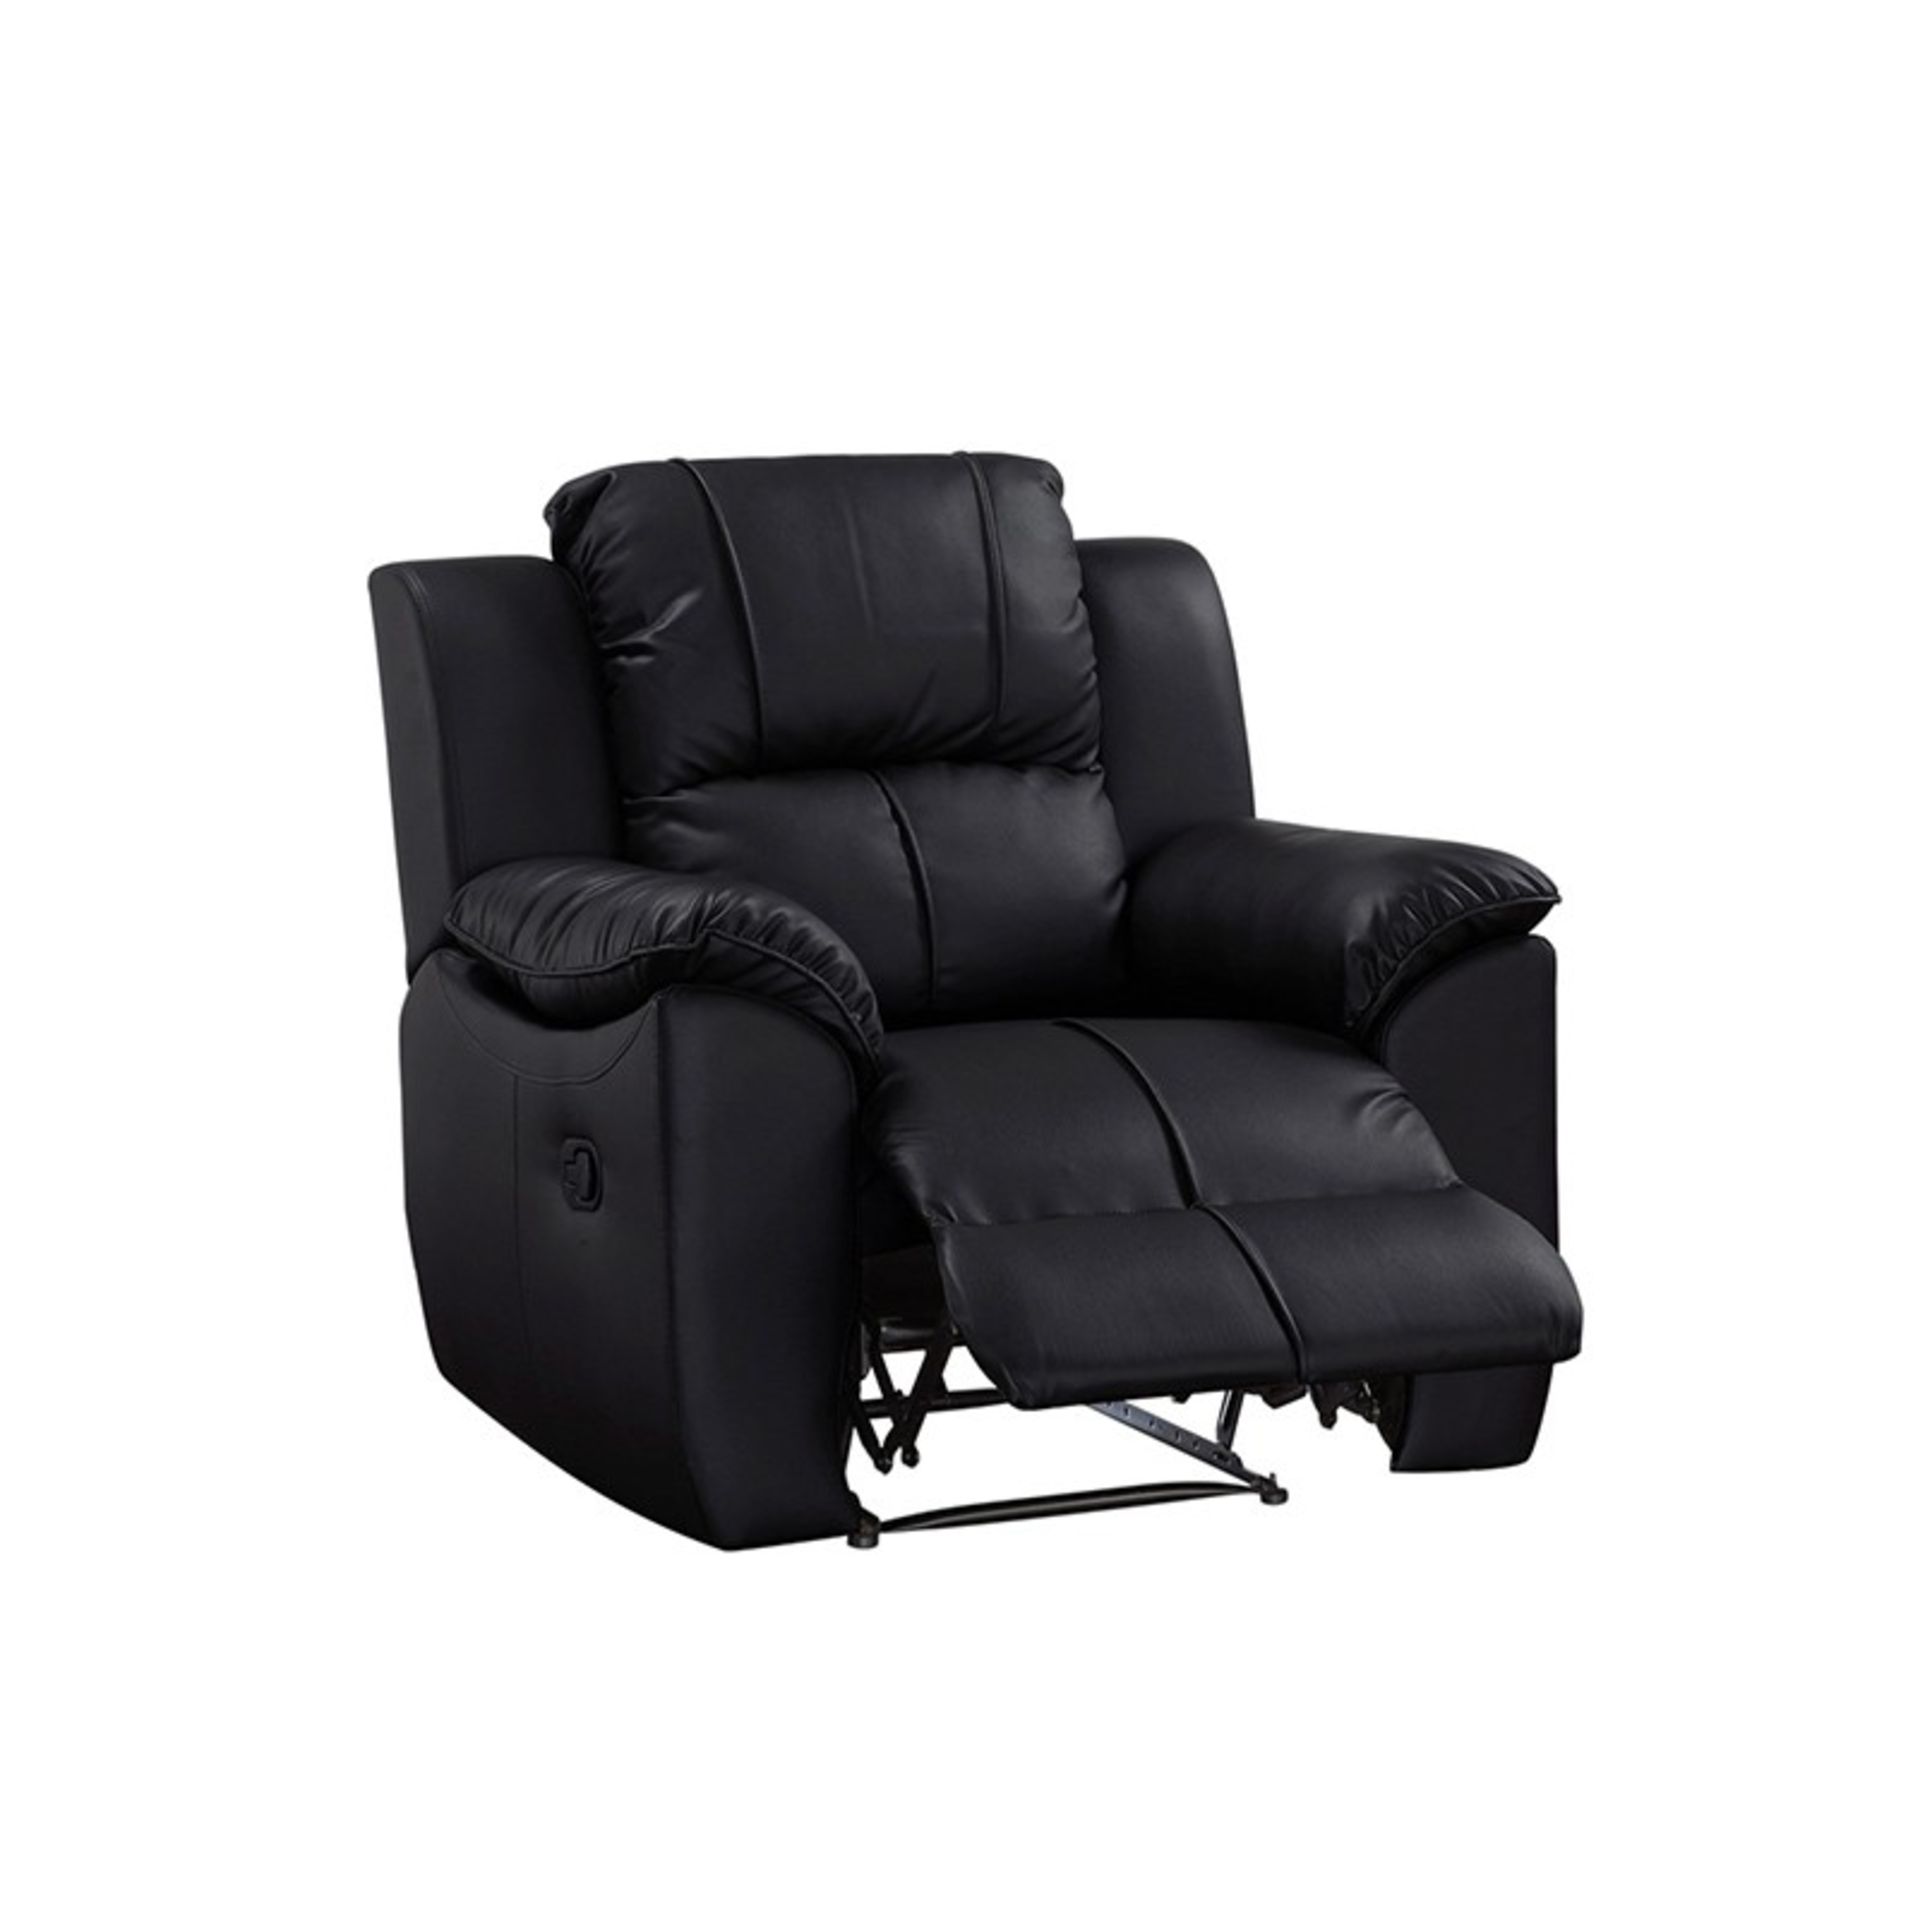 Brand New and Boxed Recliner Armchair (Black) RRP